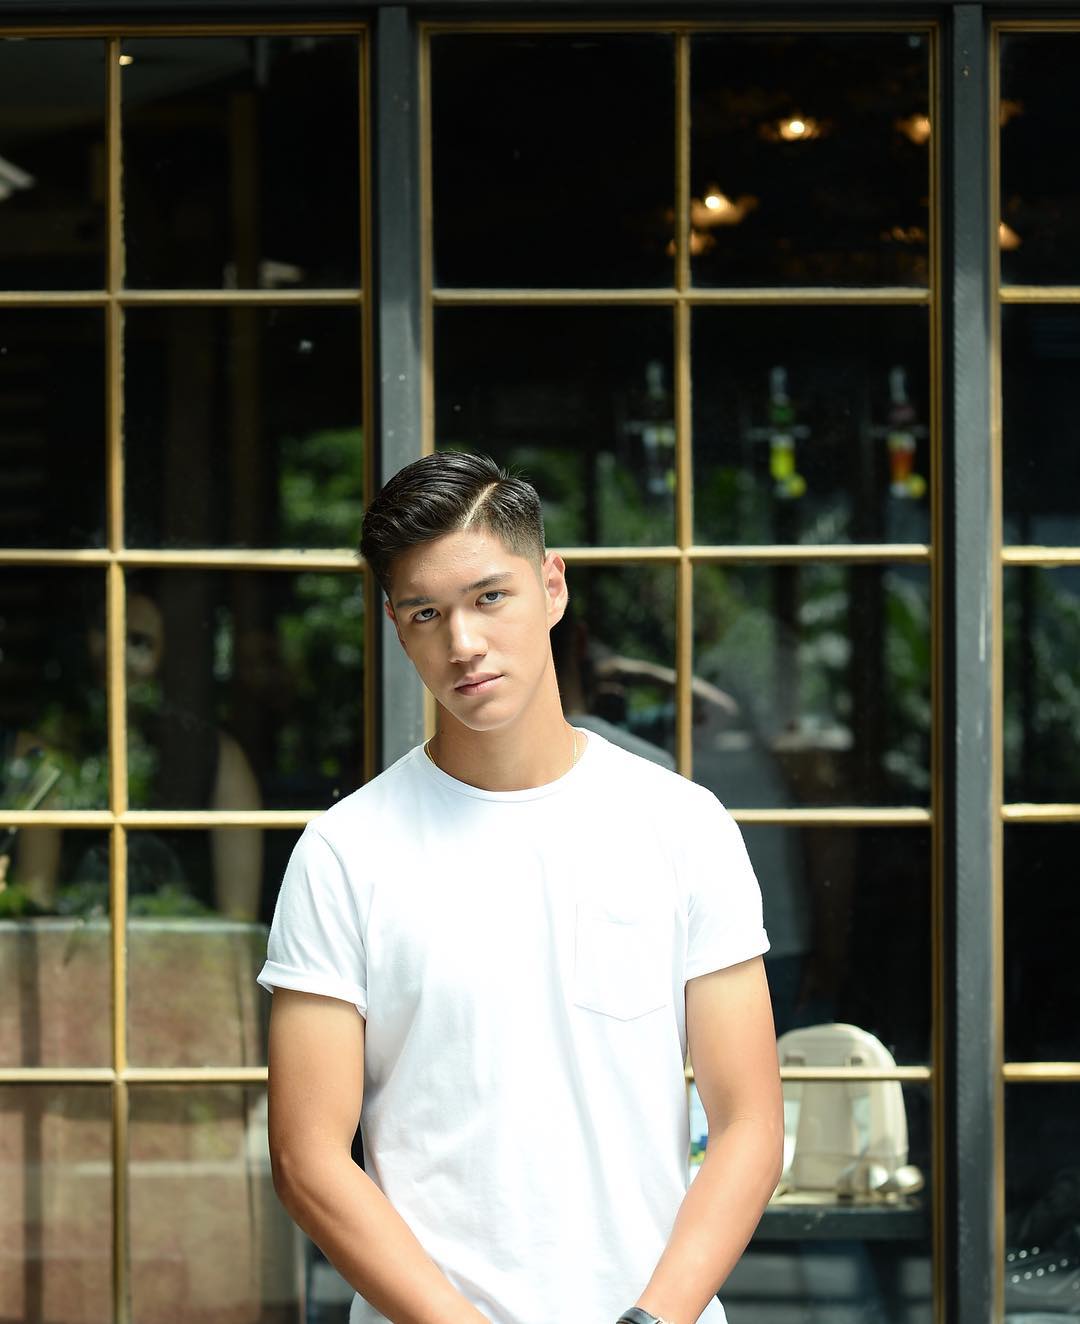 Look Jericho Rosales Son Is A Top Model In The Making